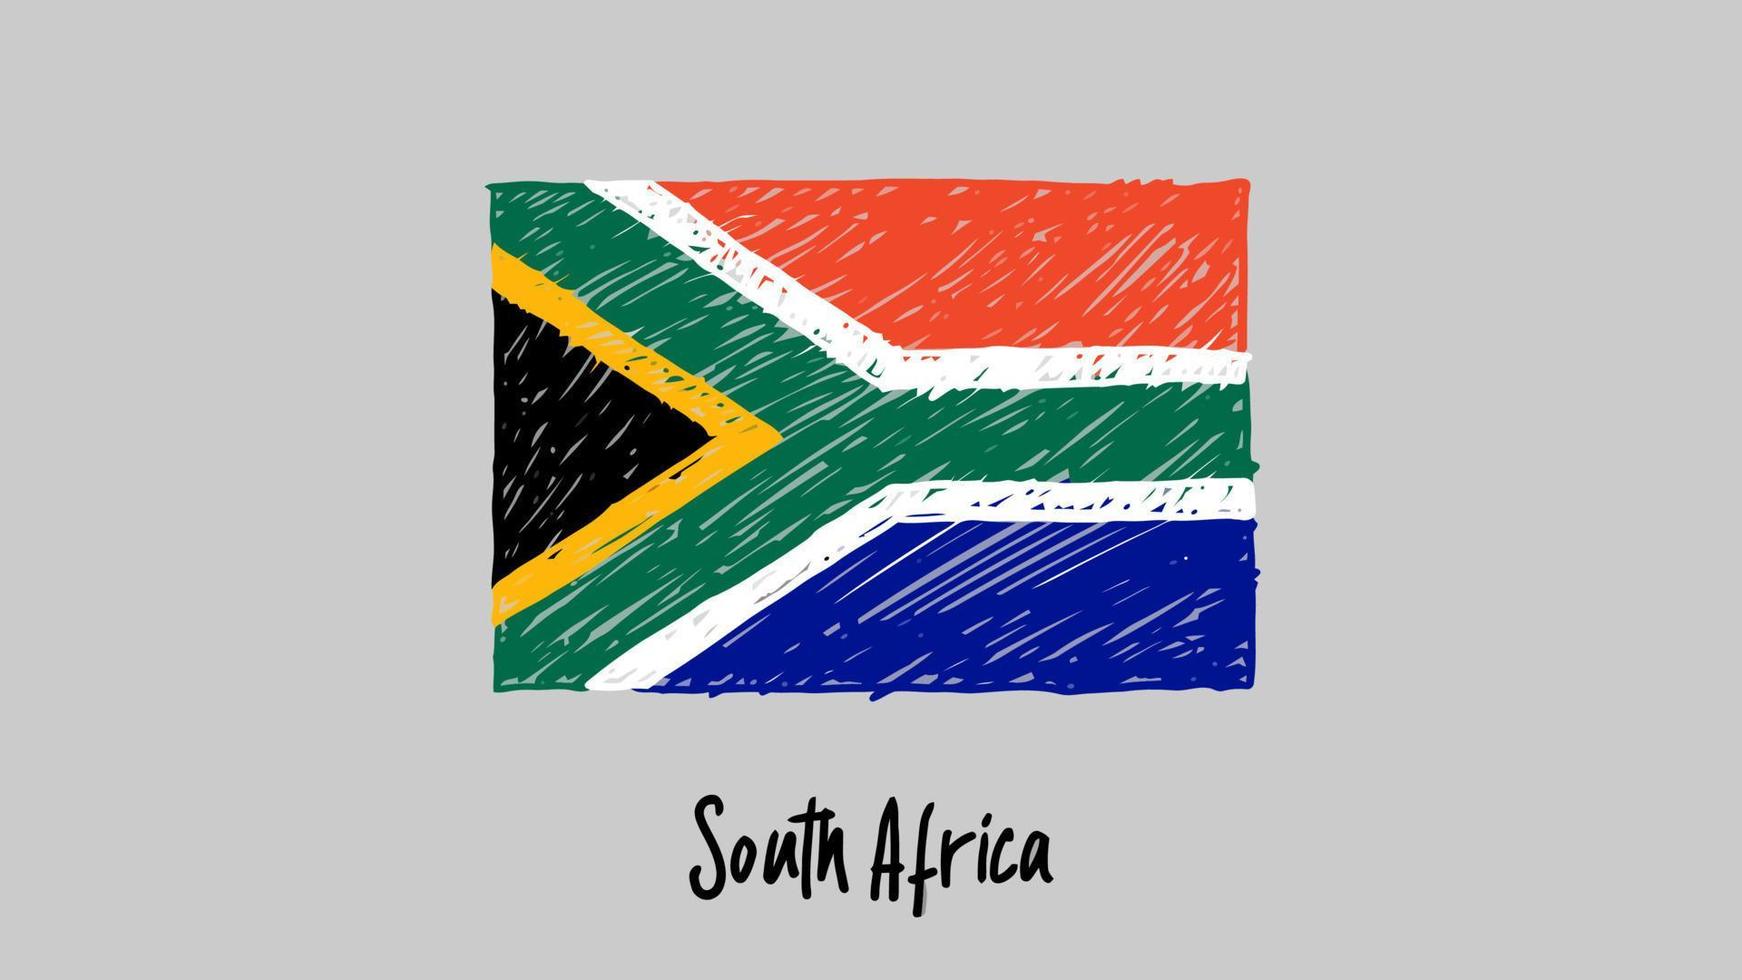 South Africa National Country Flag Marker or Pencil Sketch Illustration Vector